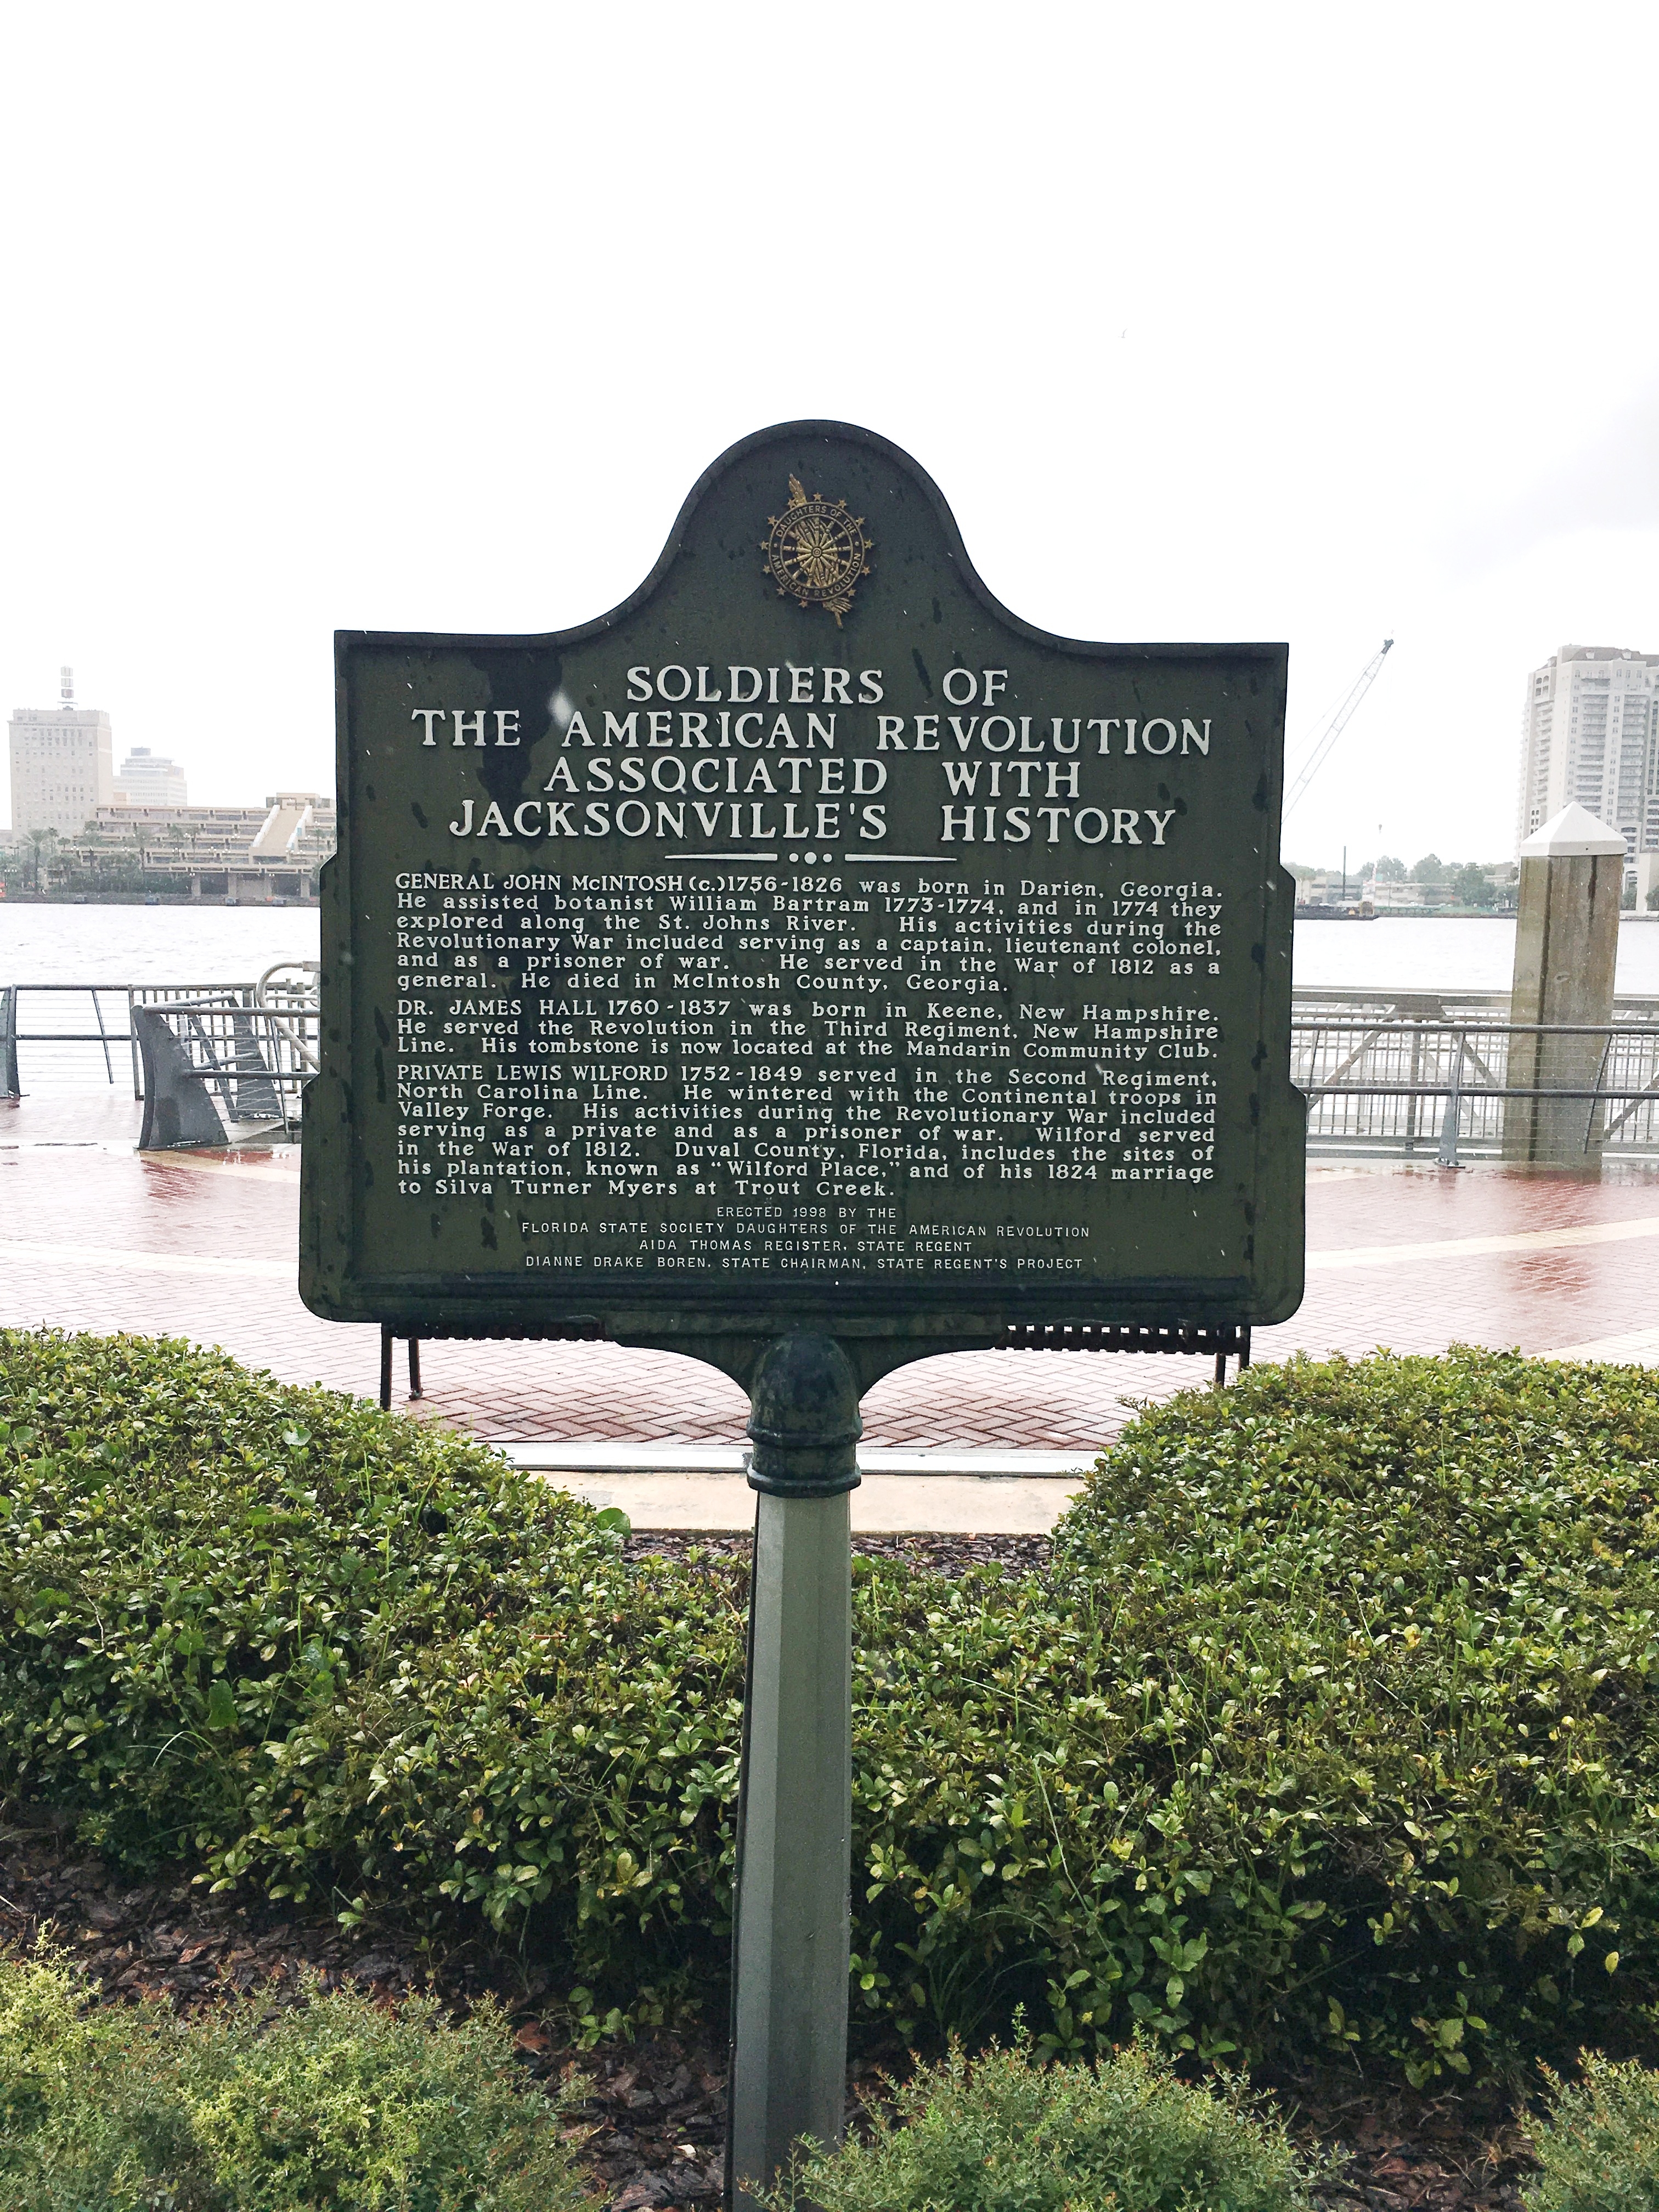 Soldiers of The American Revolution Associated with Jacksonville’s History Marker